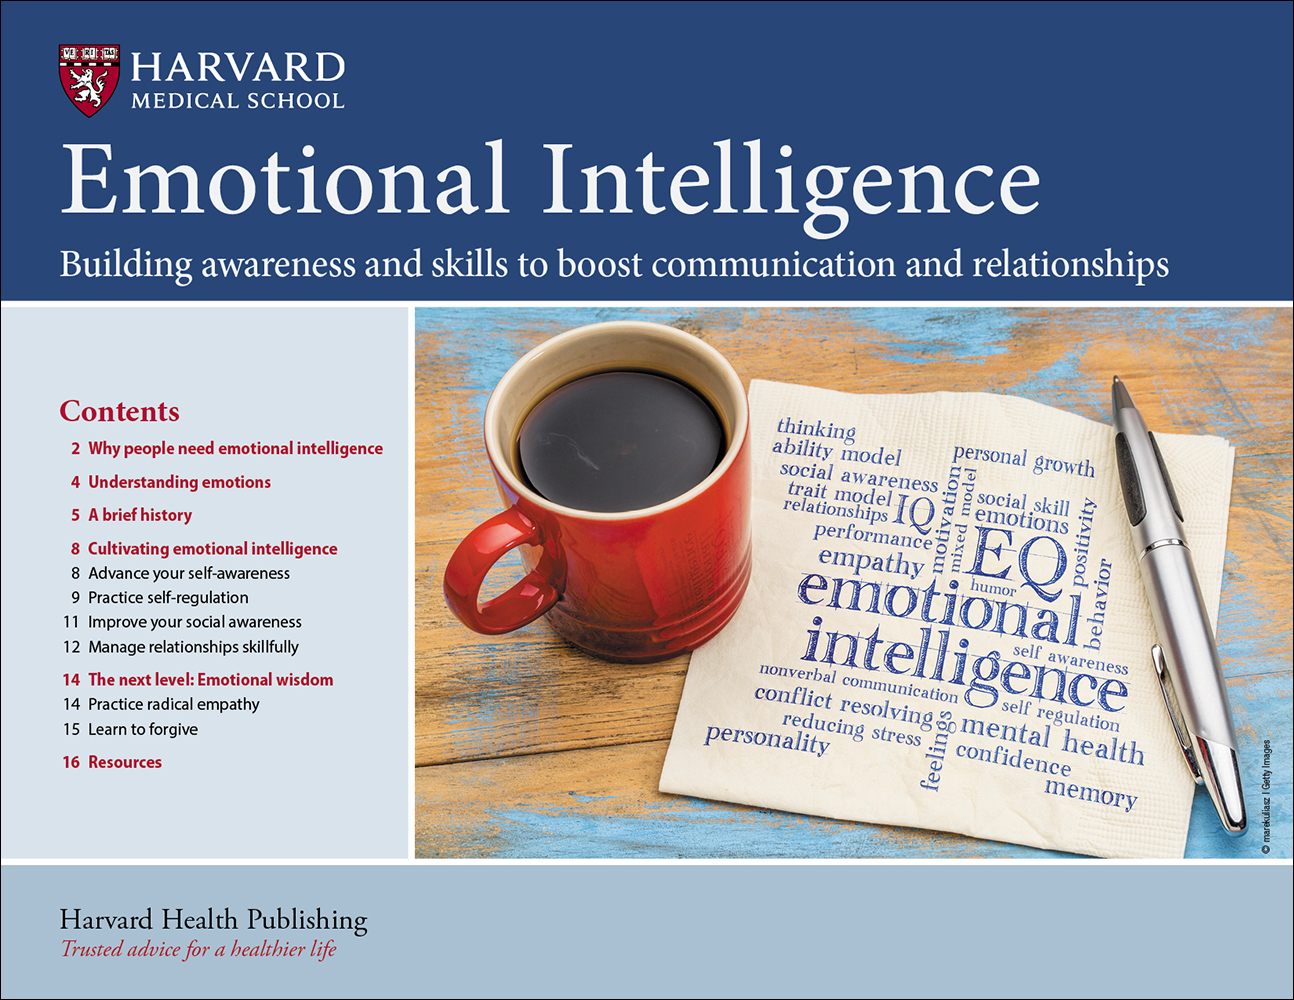 research studies on emotional intelligence